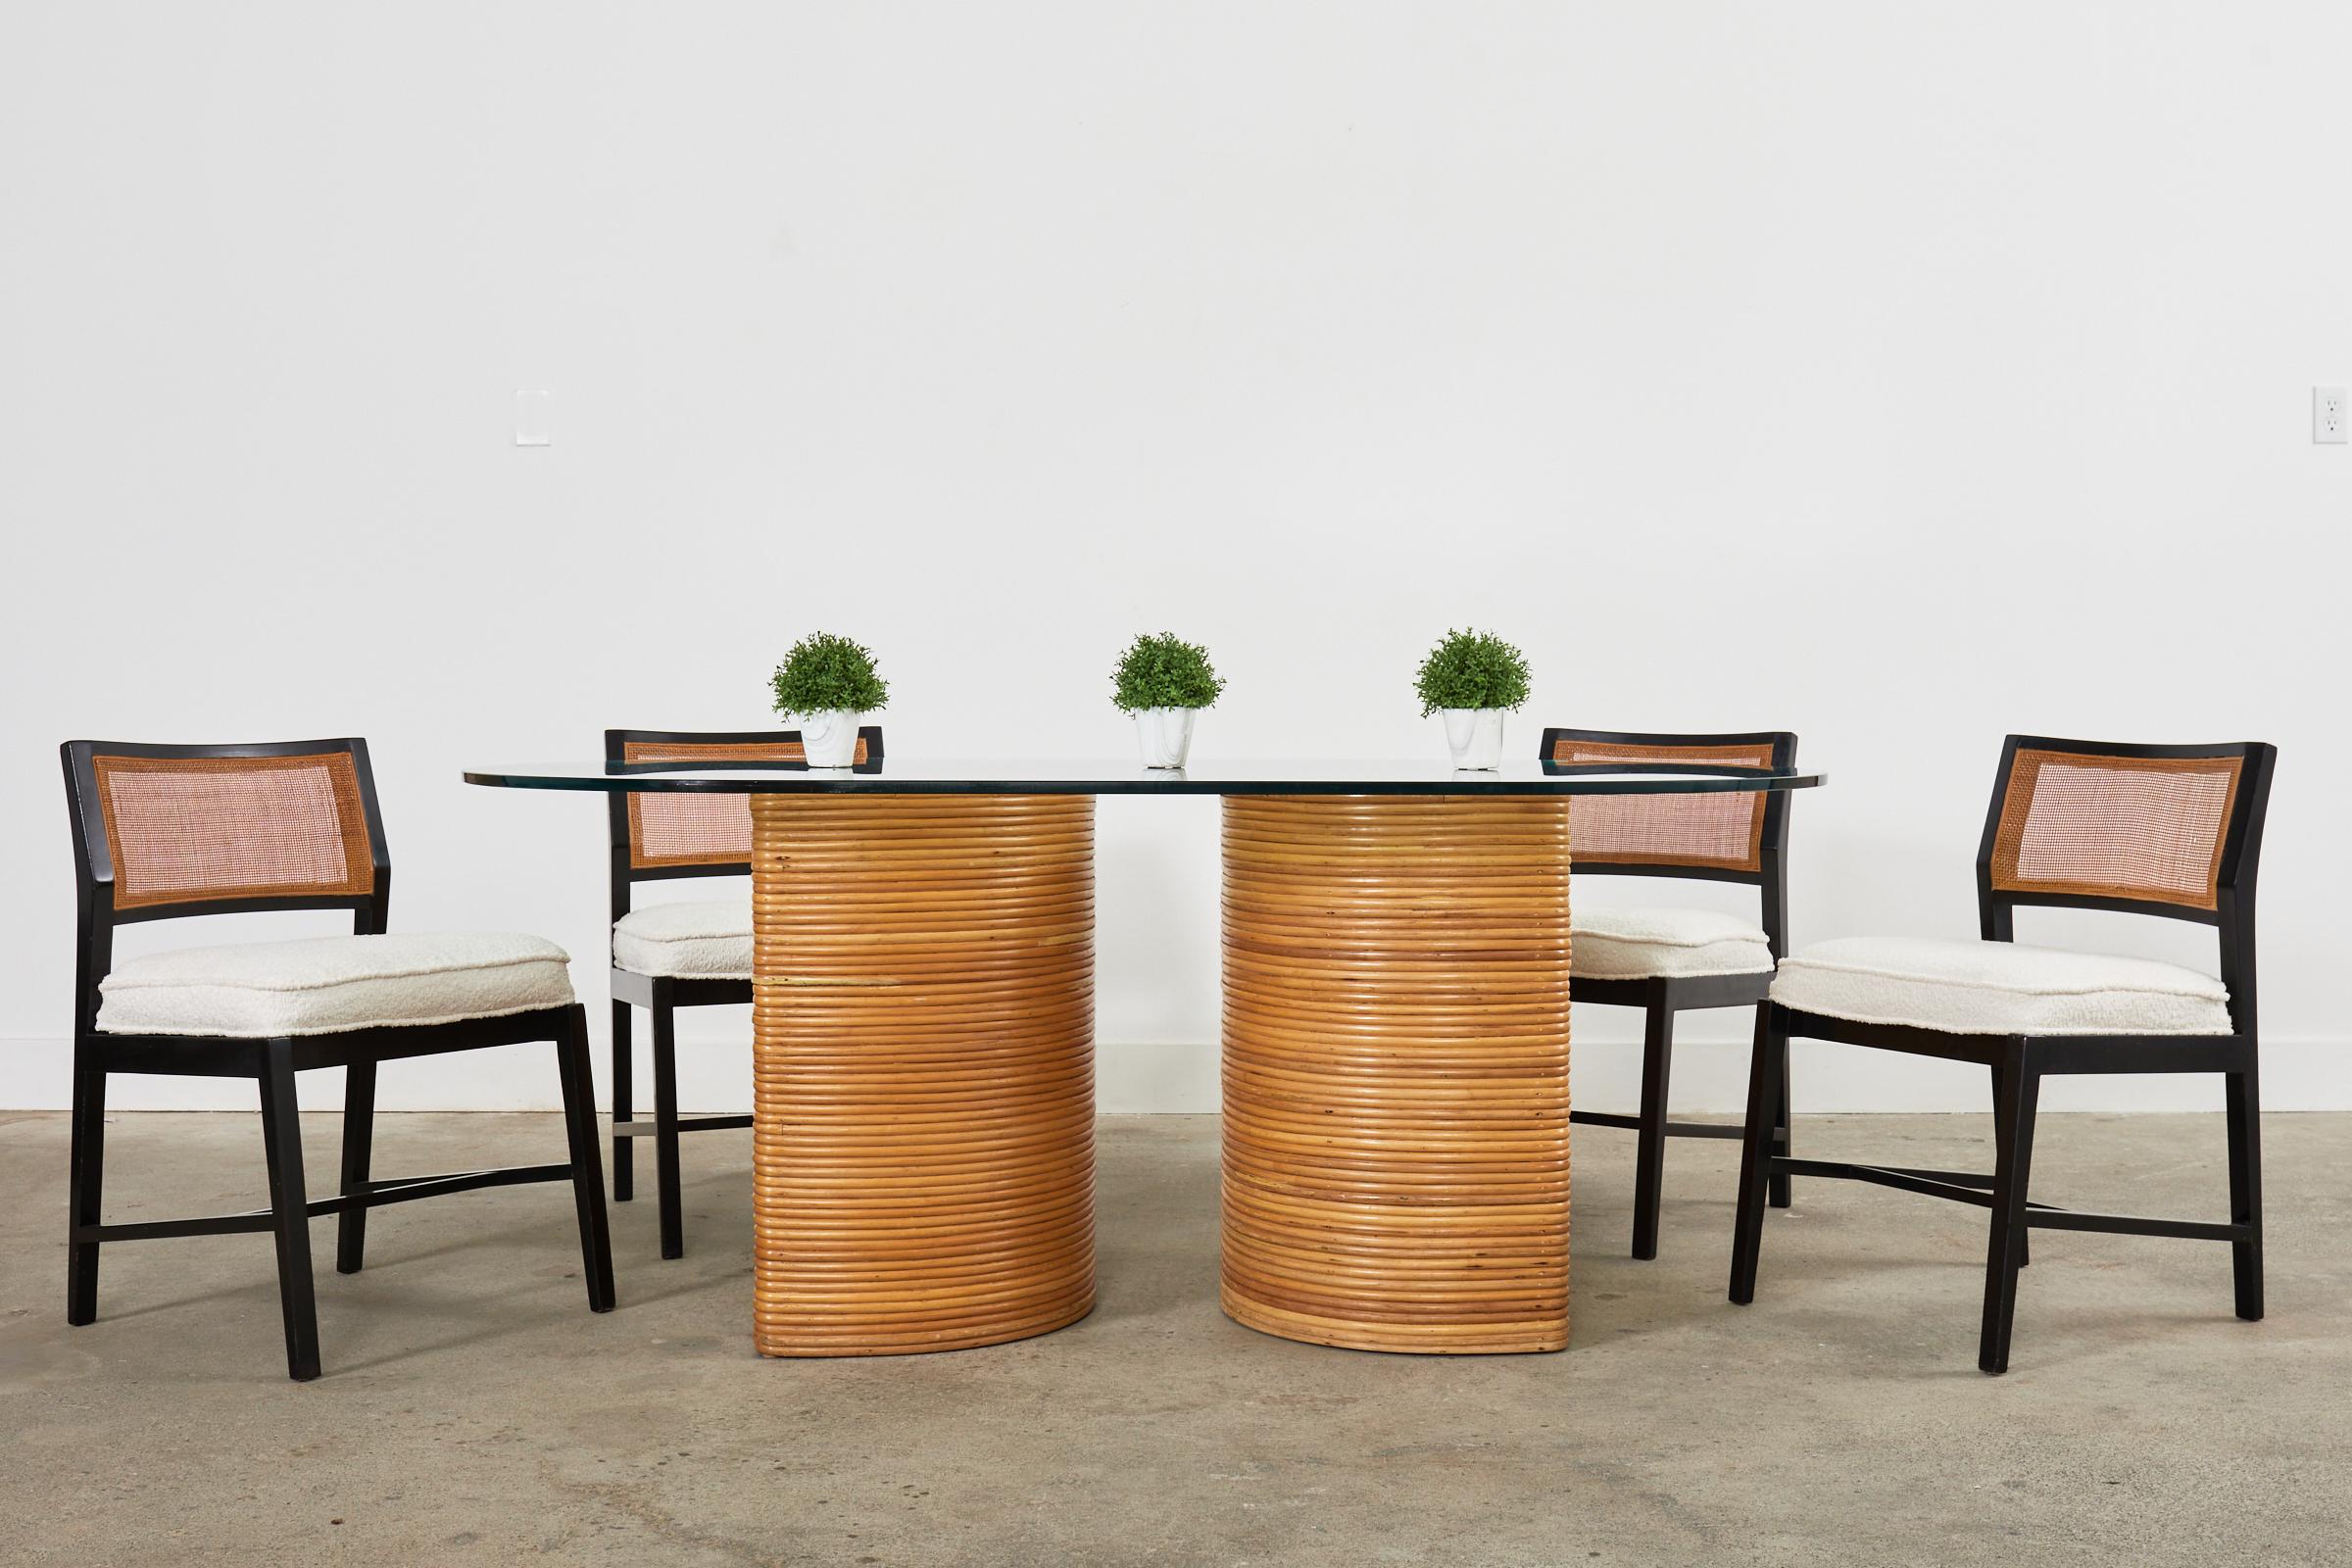 Fantastic Mid-Century Modern Italian double pedestal dining table crafted from split reed rattan. The organic modern design features are demilune or 